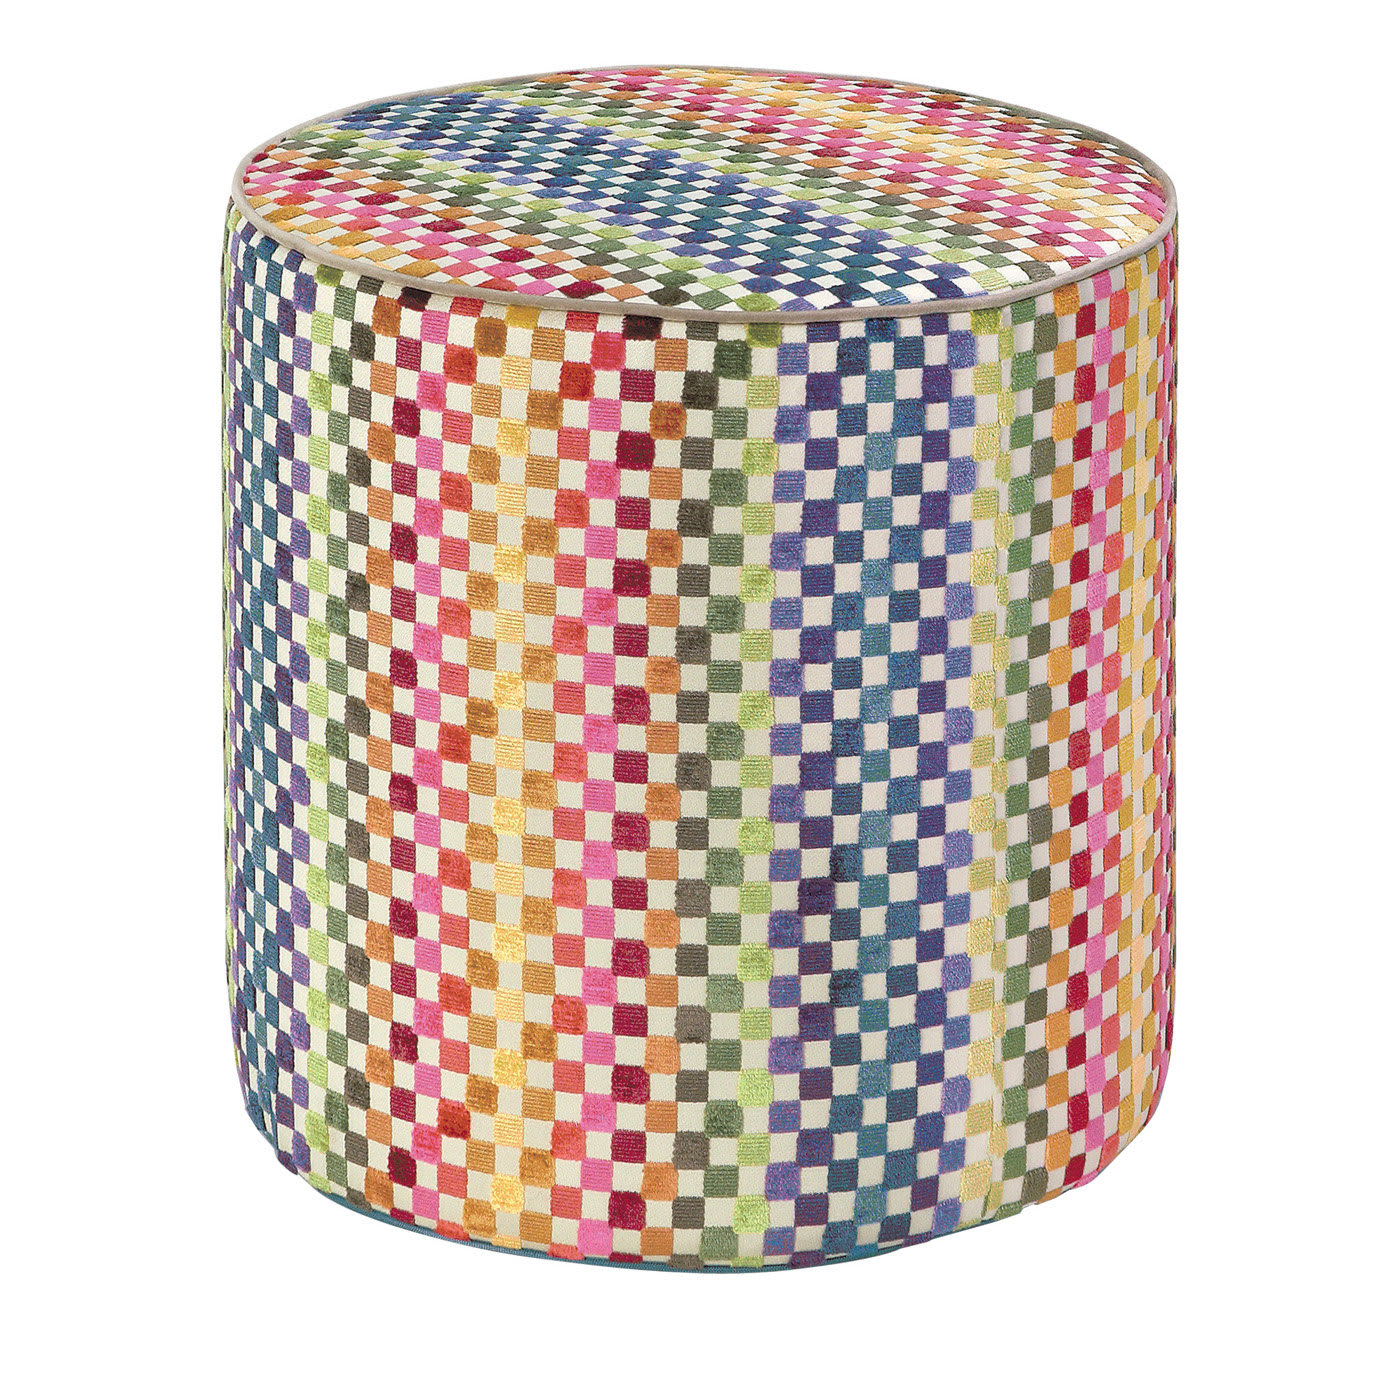 Maseko Multicolor cylinder pouf #1 - Missoni Home Collection